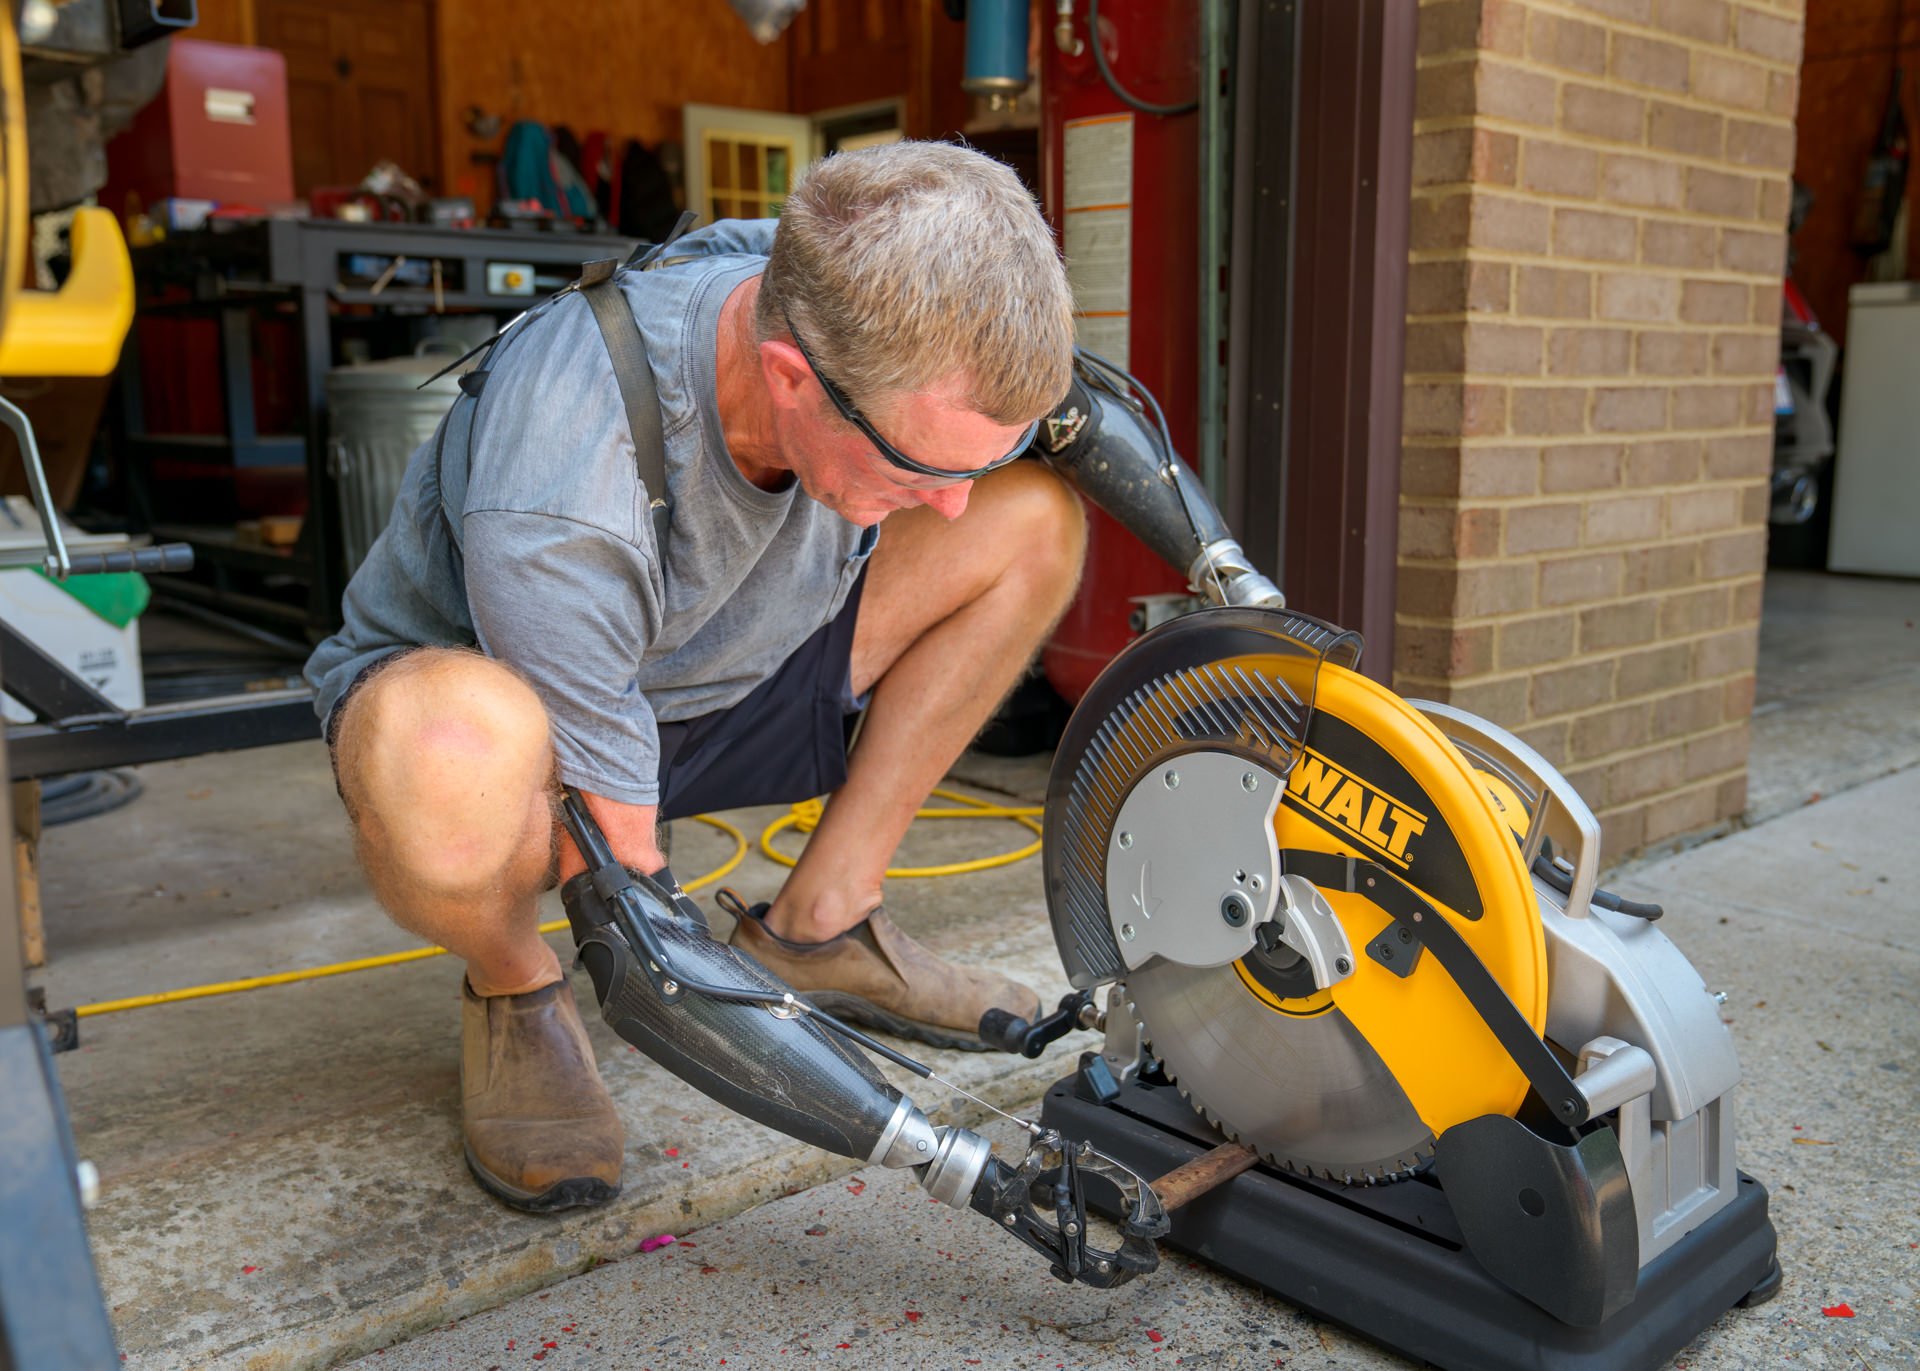 Gerry Kinney, a bilateral transradial patient, wears his body-powered prostheses to get work done around the shop.